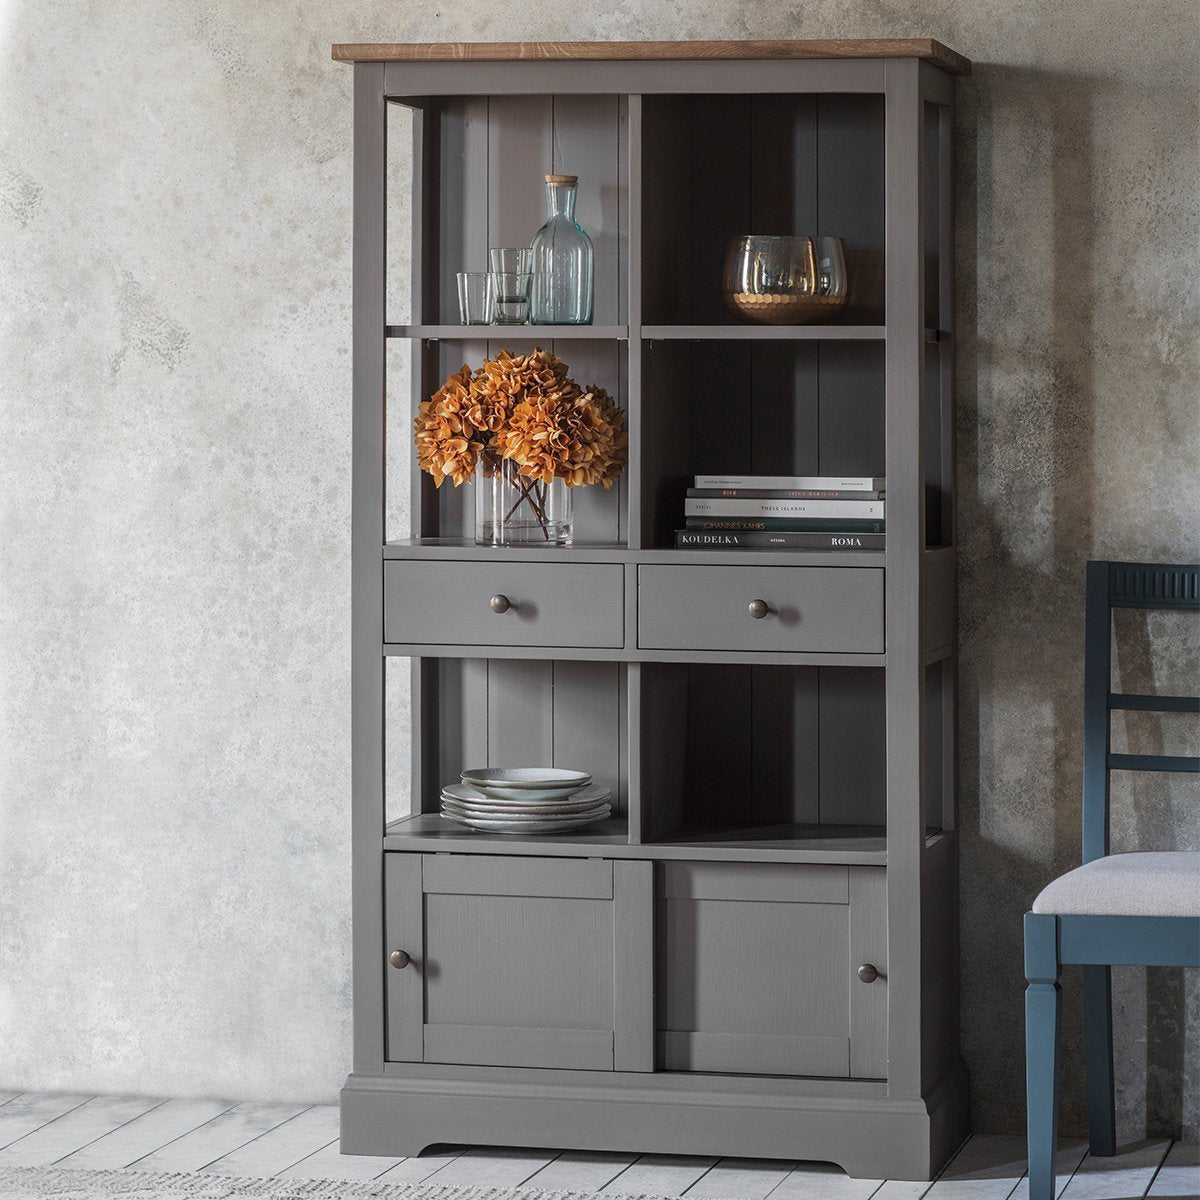 Gallery Direct Cookham Rustic Bookcase In Grey Outlet